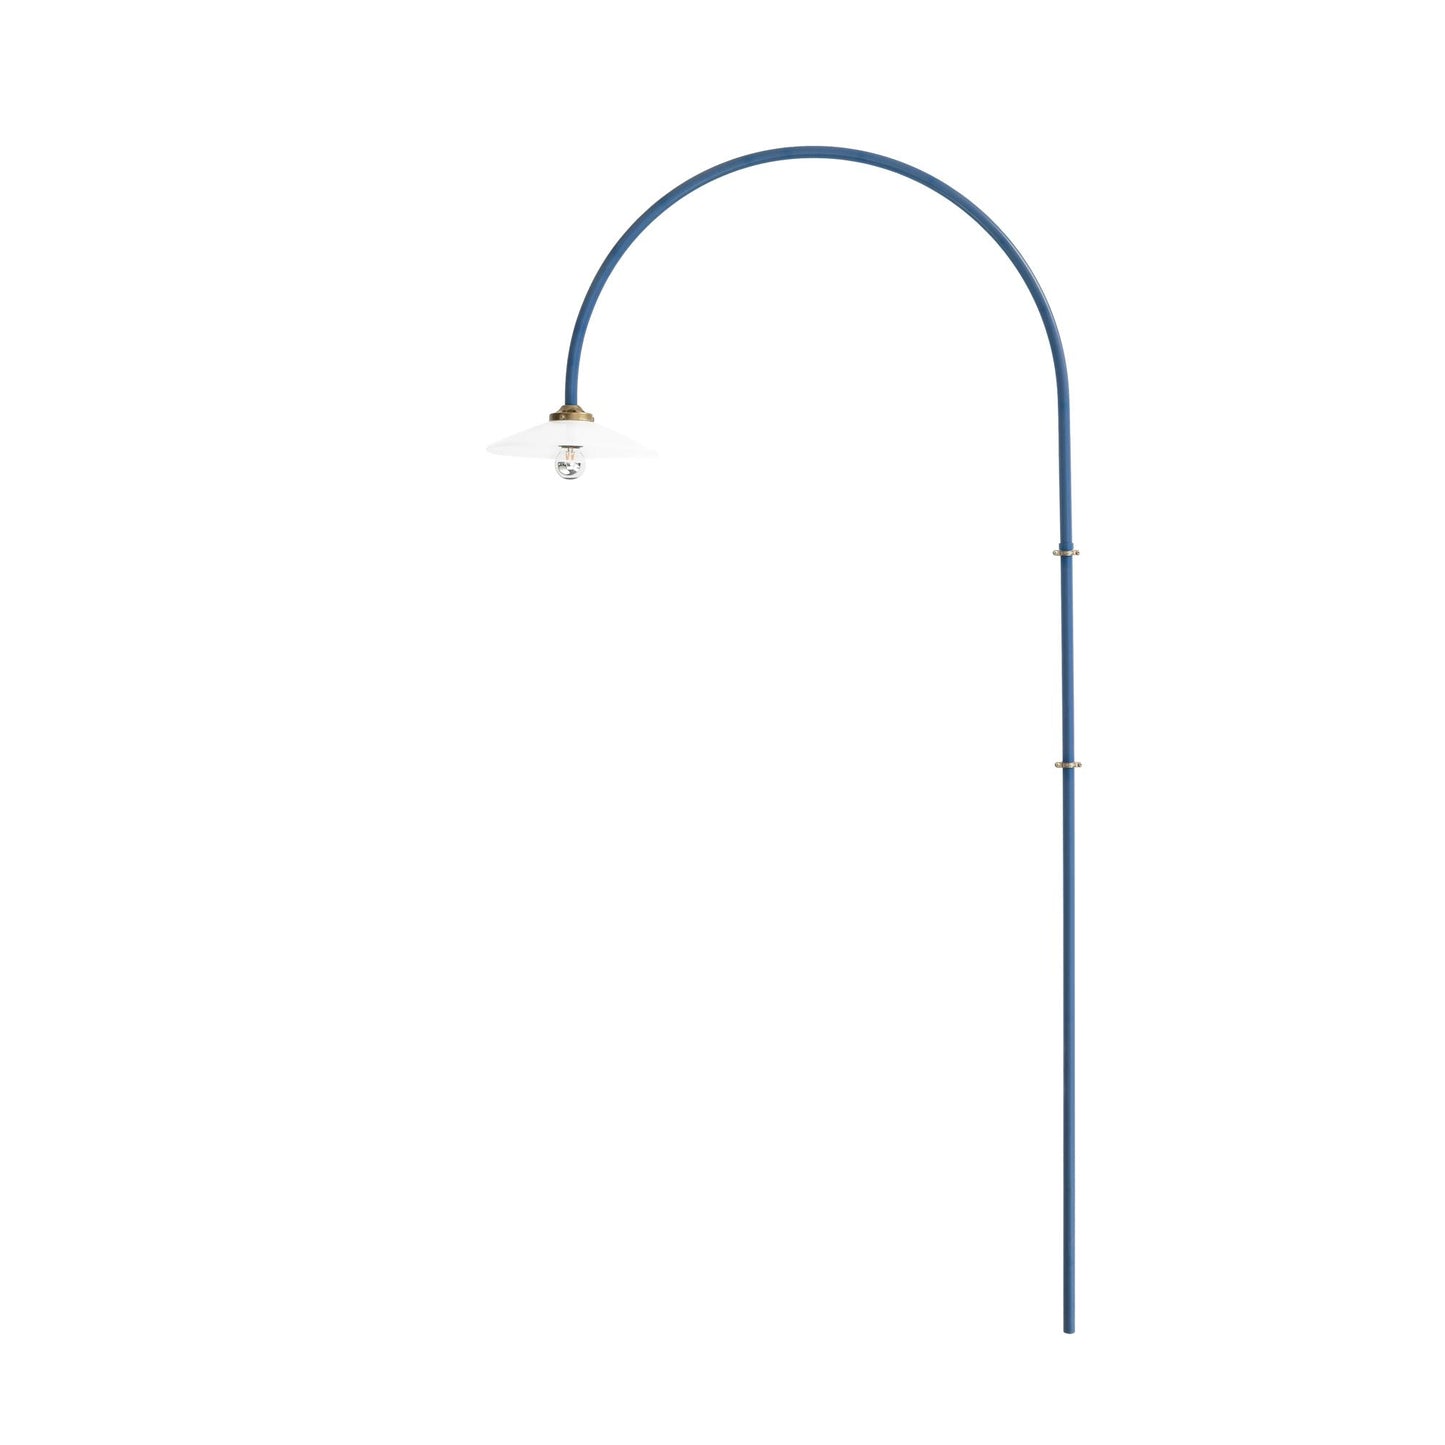 Hanging Lamp N°2 Wall Lamp by Valerie Objects #Blue